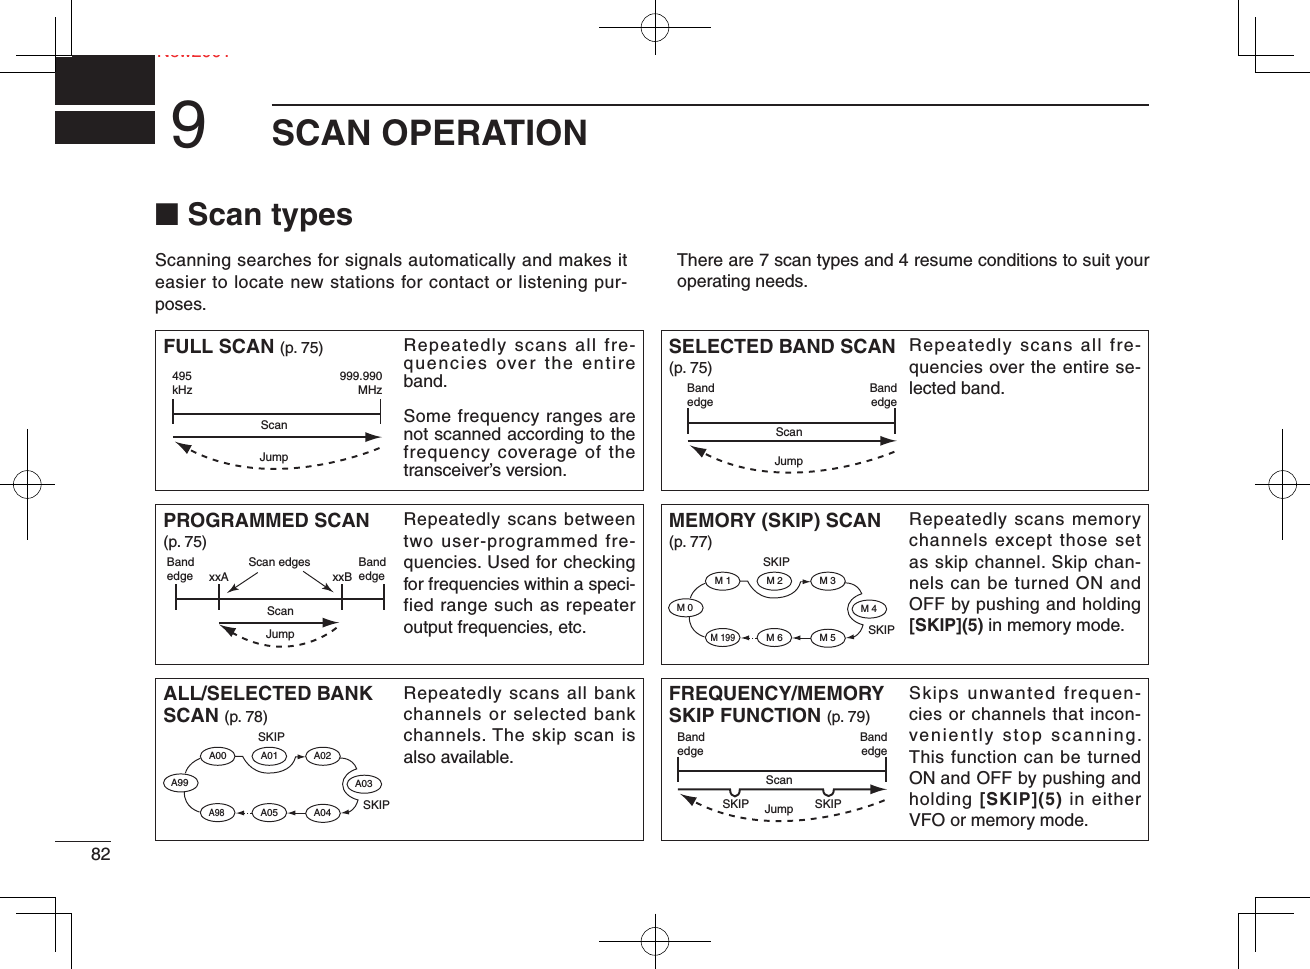 82NeNew2001SCAN OPERATION9■ Scan typesScanning searches for signals automatically and makes it easier to locate new stations for contact or listening pur-poses.There are 7 scan types and 4 resume conditions to suit your operating needs.FULL SCAN (p. 75) Repeatedly scans all fre-quencies over the entire band. Some frequency ranges are not scanned according to the frequency coverage of the transceiver’s version.SELECTED BAND SCAN (p. 75)Repeatedly scans all fre-quencies over the entire se-lected band. ALL/SELECTED BANK SCAN (p. 78)Repeatedly scans all bank channels or selected bank channels. The skip scan is also available.FREQUENCY/MEMORY SKIP FUNCTION (p. 79)Skips unwanted frequen-cies or channels that incon-veniently stop scanning. This function can be turned ON and OFF by pushing and holding [SKIP](5) in either VFO or memory mode.PROGRAMMED SCAN (p. 75)Repeatedly scans between two user-programmed fre-quencies. Used for checking for frequencies within a speci-fied range such as repeater output frequencies, etc.MEMORY (SKIP) SCAN (p. 77)Repeatedly scans memory channels except those set as skip channel. Skip chan-nels can be turned ON and OFF by pushing and holding [SKIP](5) in memory mode.495kHz999.990MHzScanJumpBandedgeBandedgeScanJumpBandedge xxA xxBBandedgeScan edgesScanJumpSKIPSKIPM 0 M 4M 1 M 2 M 3M 5M 199M 6SKIPSKIPA99 A03A00 A01 A02A04A98A05BandedgeBandedgeScanSKIP SKIPJump